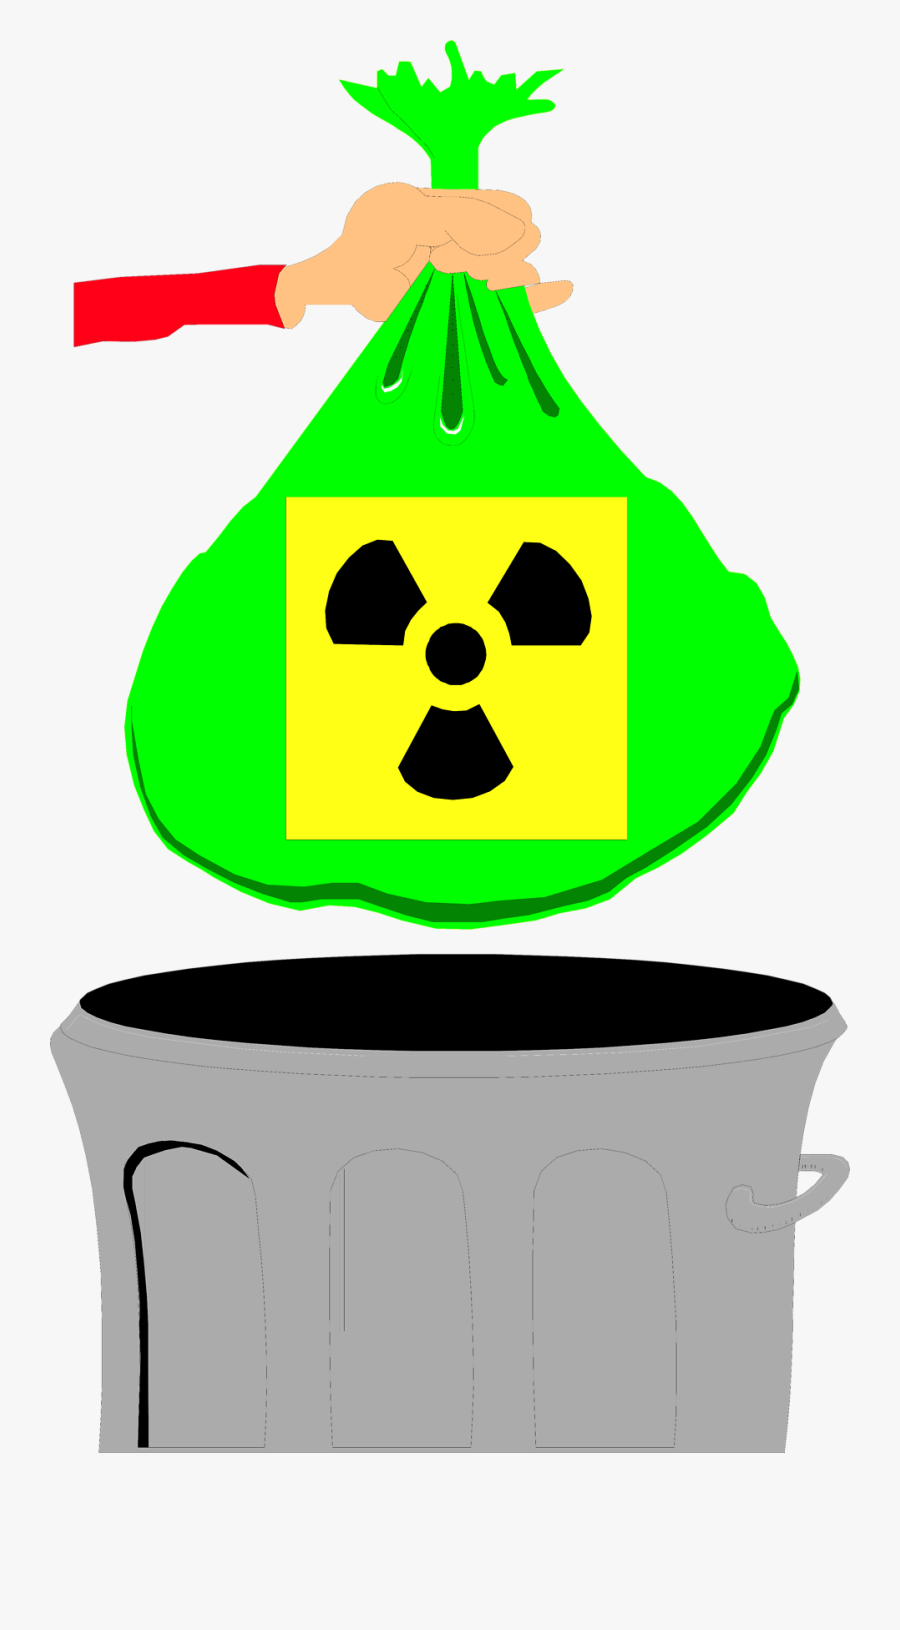 Toxic Waste Clipart Png, Transparent Clipart